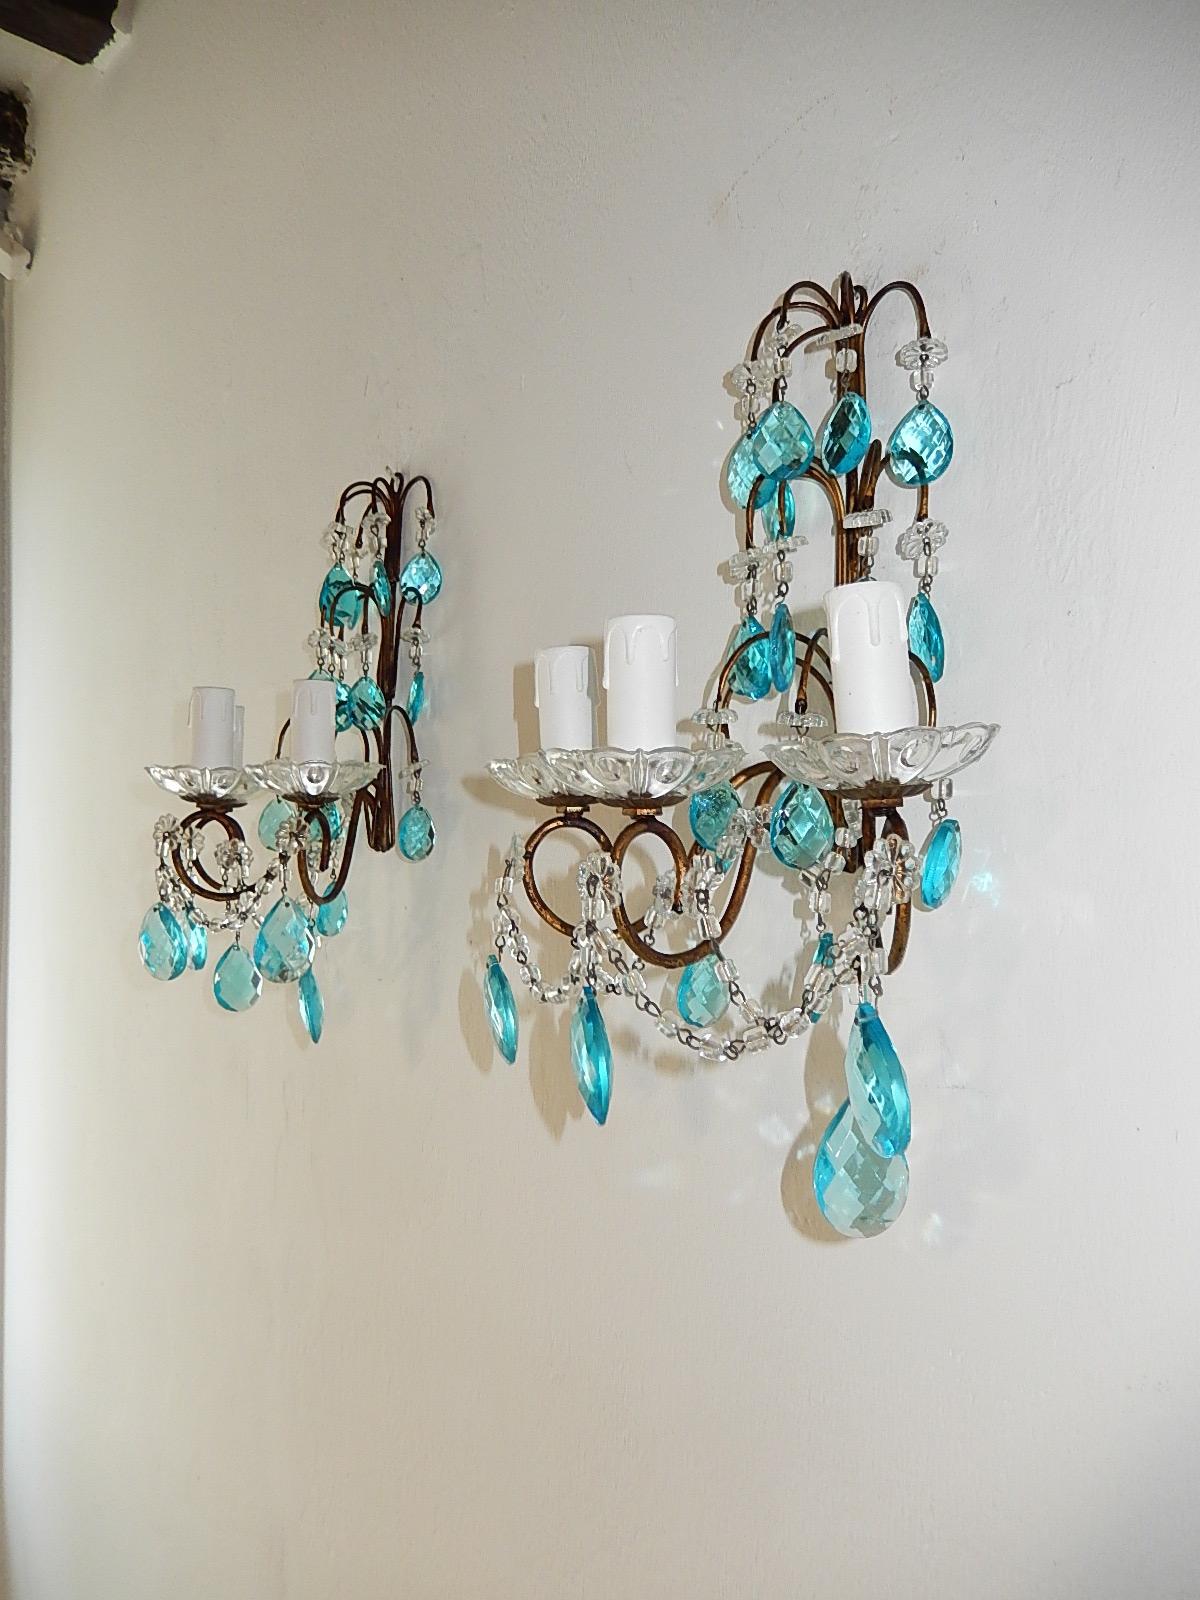 1920 French Aqua Blue Crystal Prisms and Swags Sconces In Good Condition For Sale In Firenze, Toscana